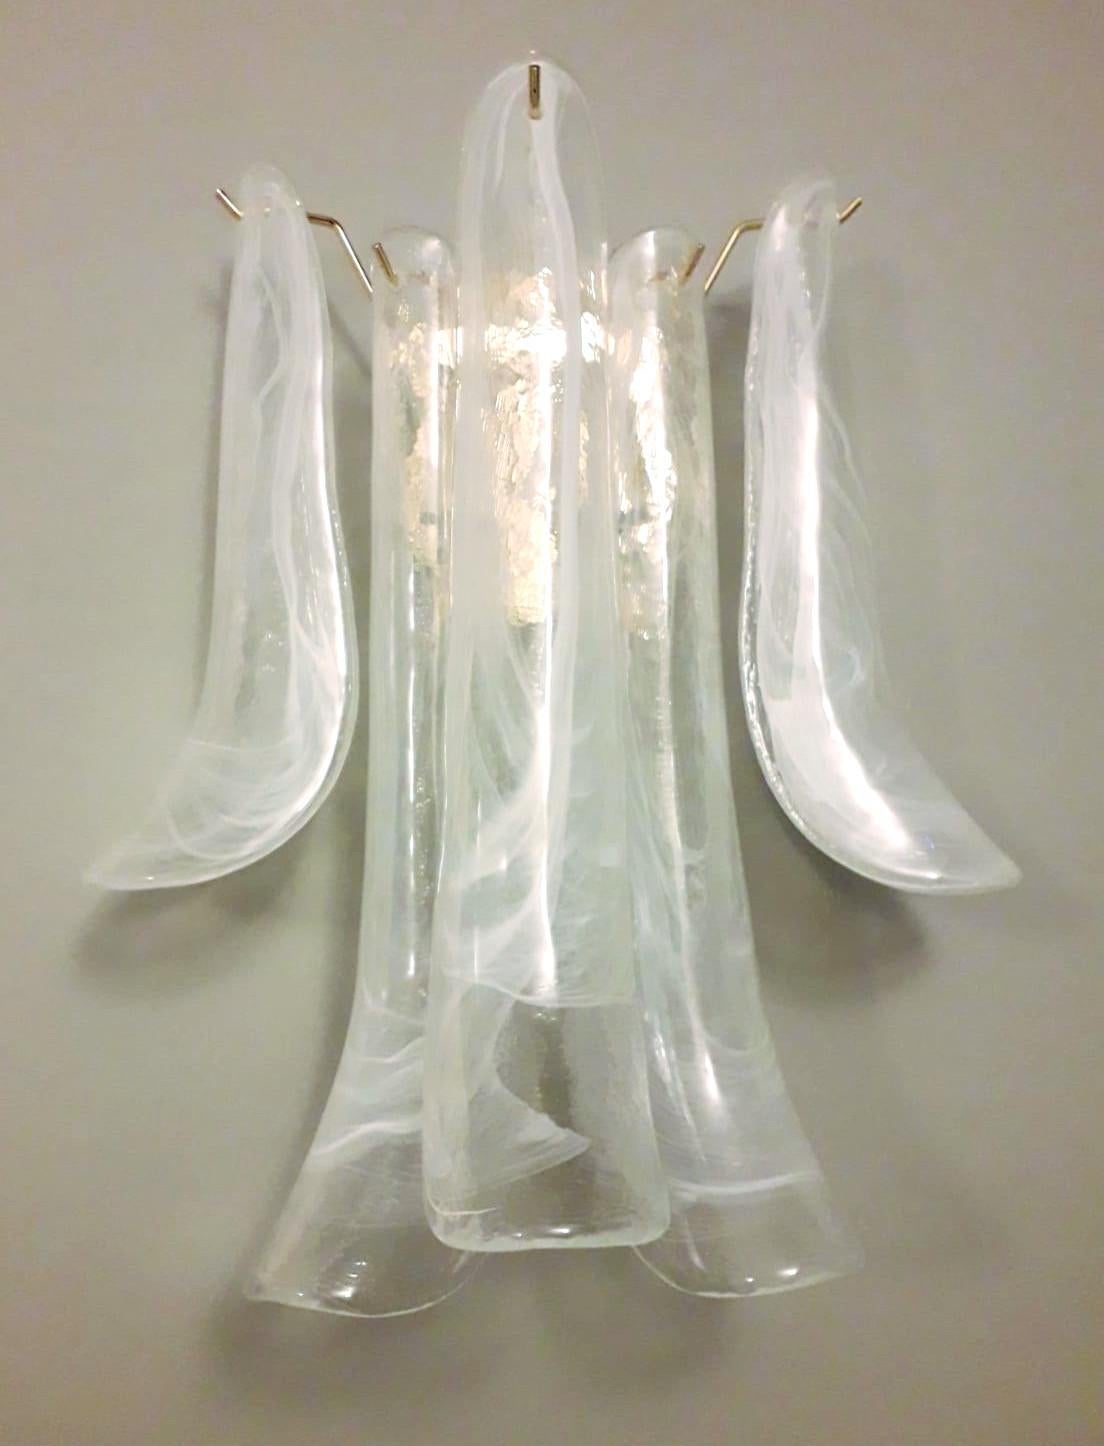 Pair of Italian wall lights with vintage clear and light milky white Murano banana glass petals mounted on newly made gold finish metal frames / Made in Italy
Measures: height 16.5 inches, width 13.5 inches, depth 8 inches
2 lights / E12 or E14